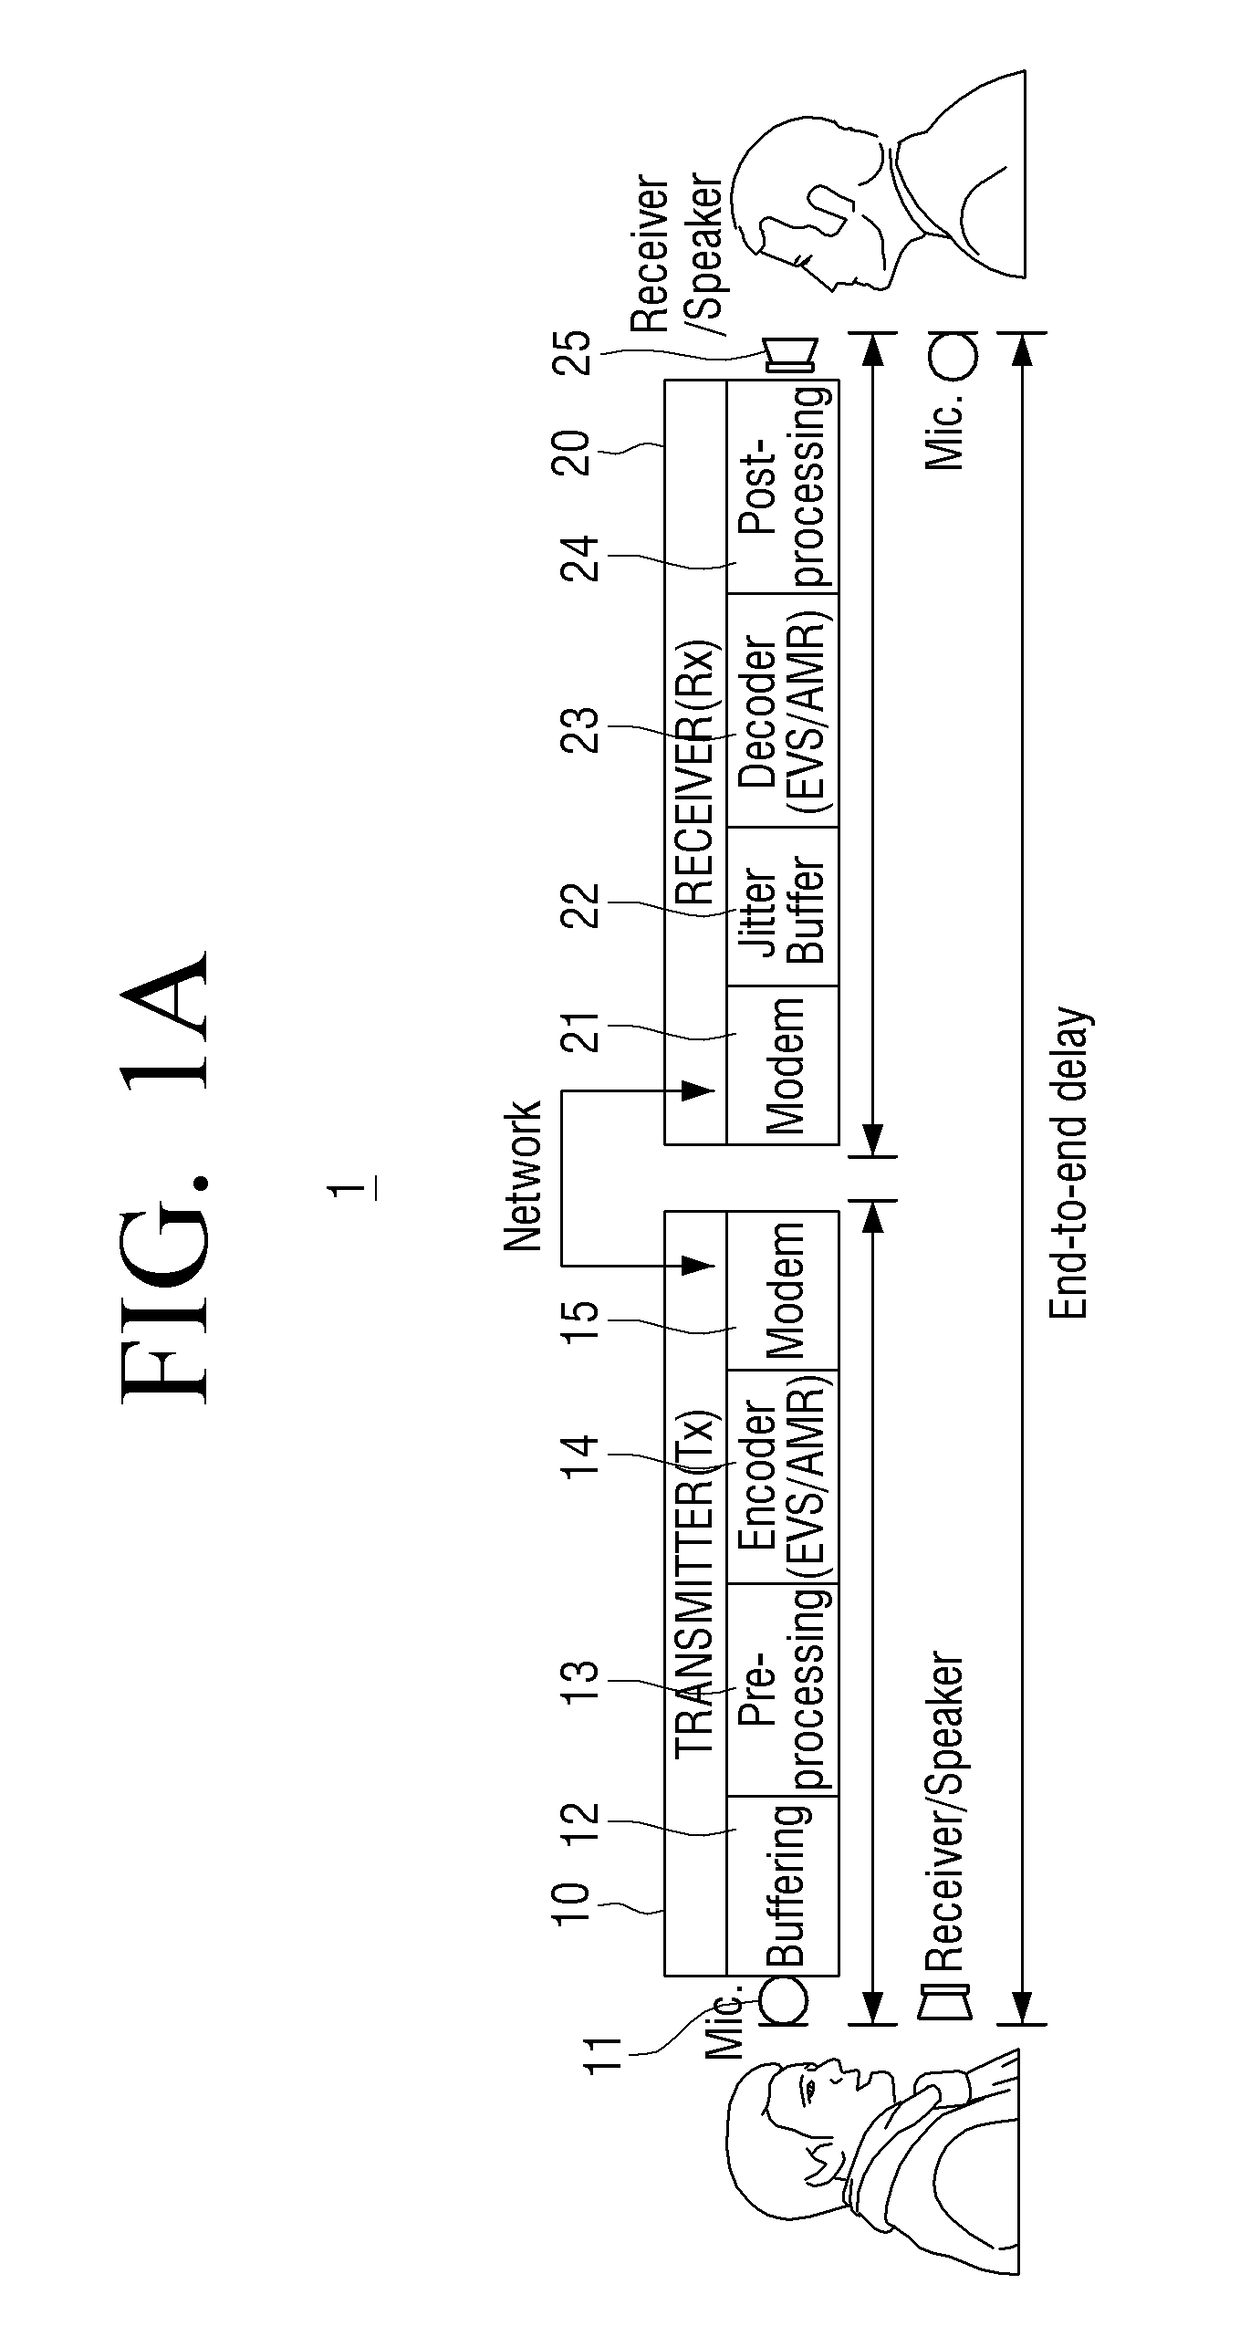 Playout delay adjustment method and electronic apparatus thereof